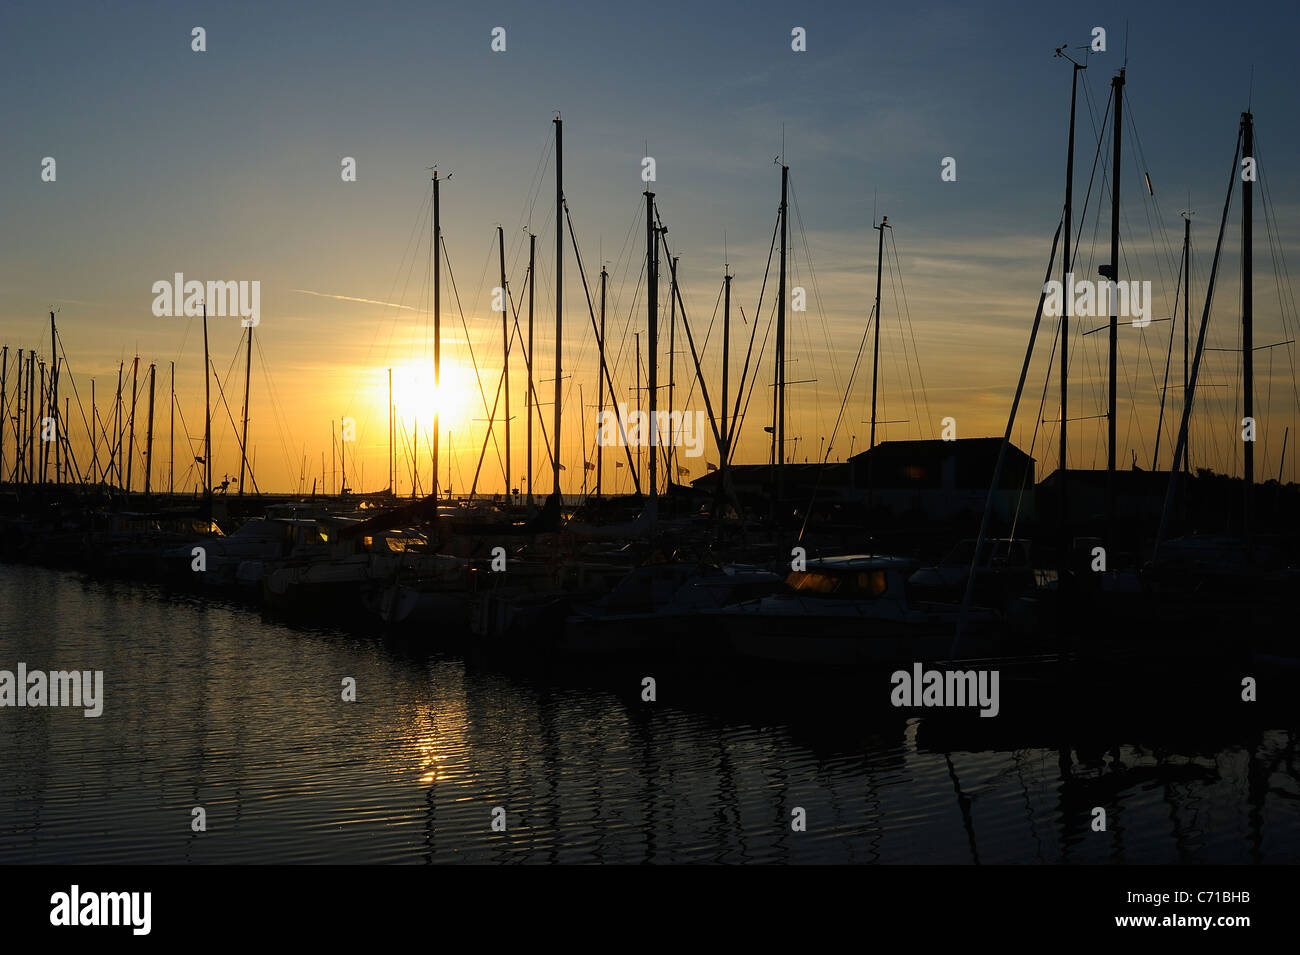 Sailing boats moored in Ars en Ré harbor at sunrise, Charente Maritime department, West of France Stock Photo